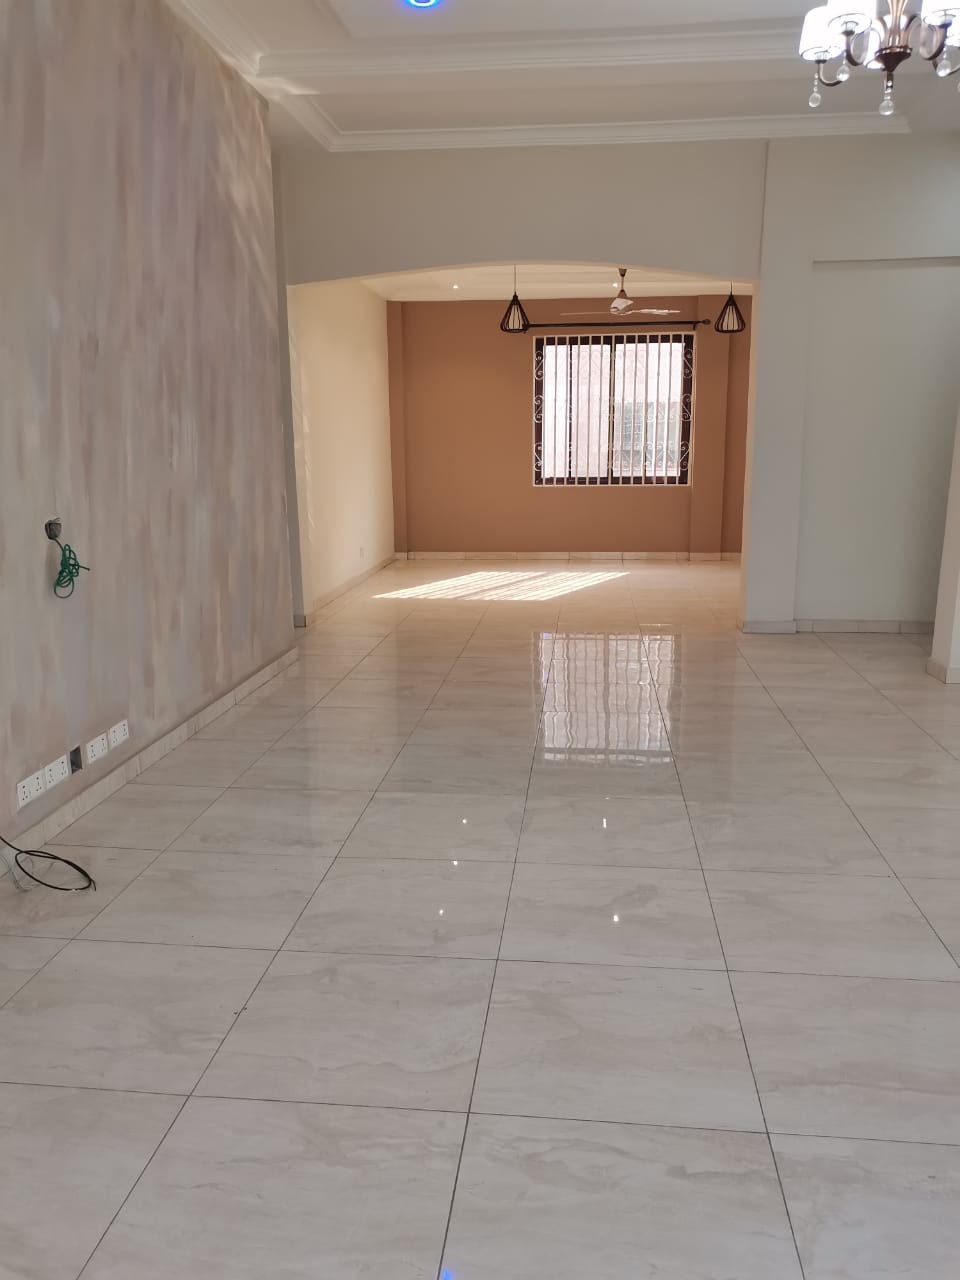 Newly Built 4-Bedroom Apartment for Rent in Secured Compound at Haatso